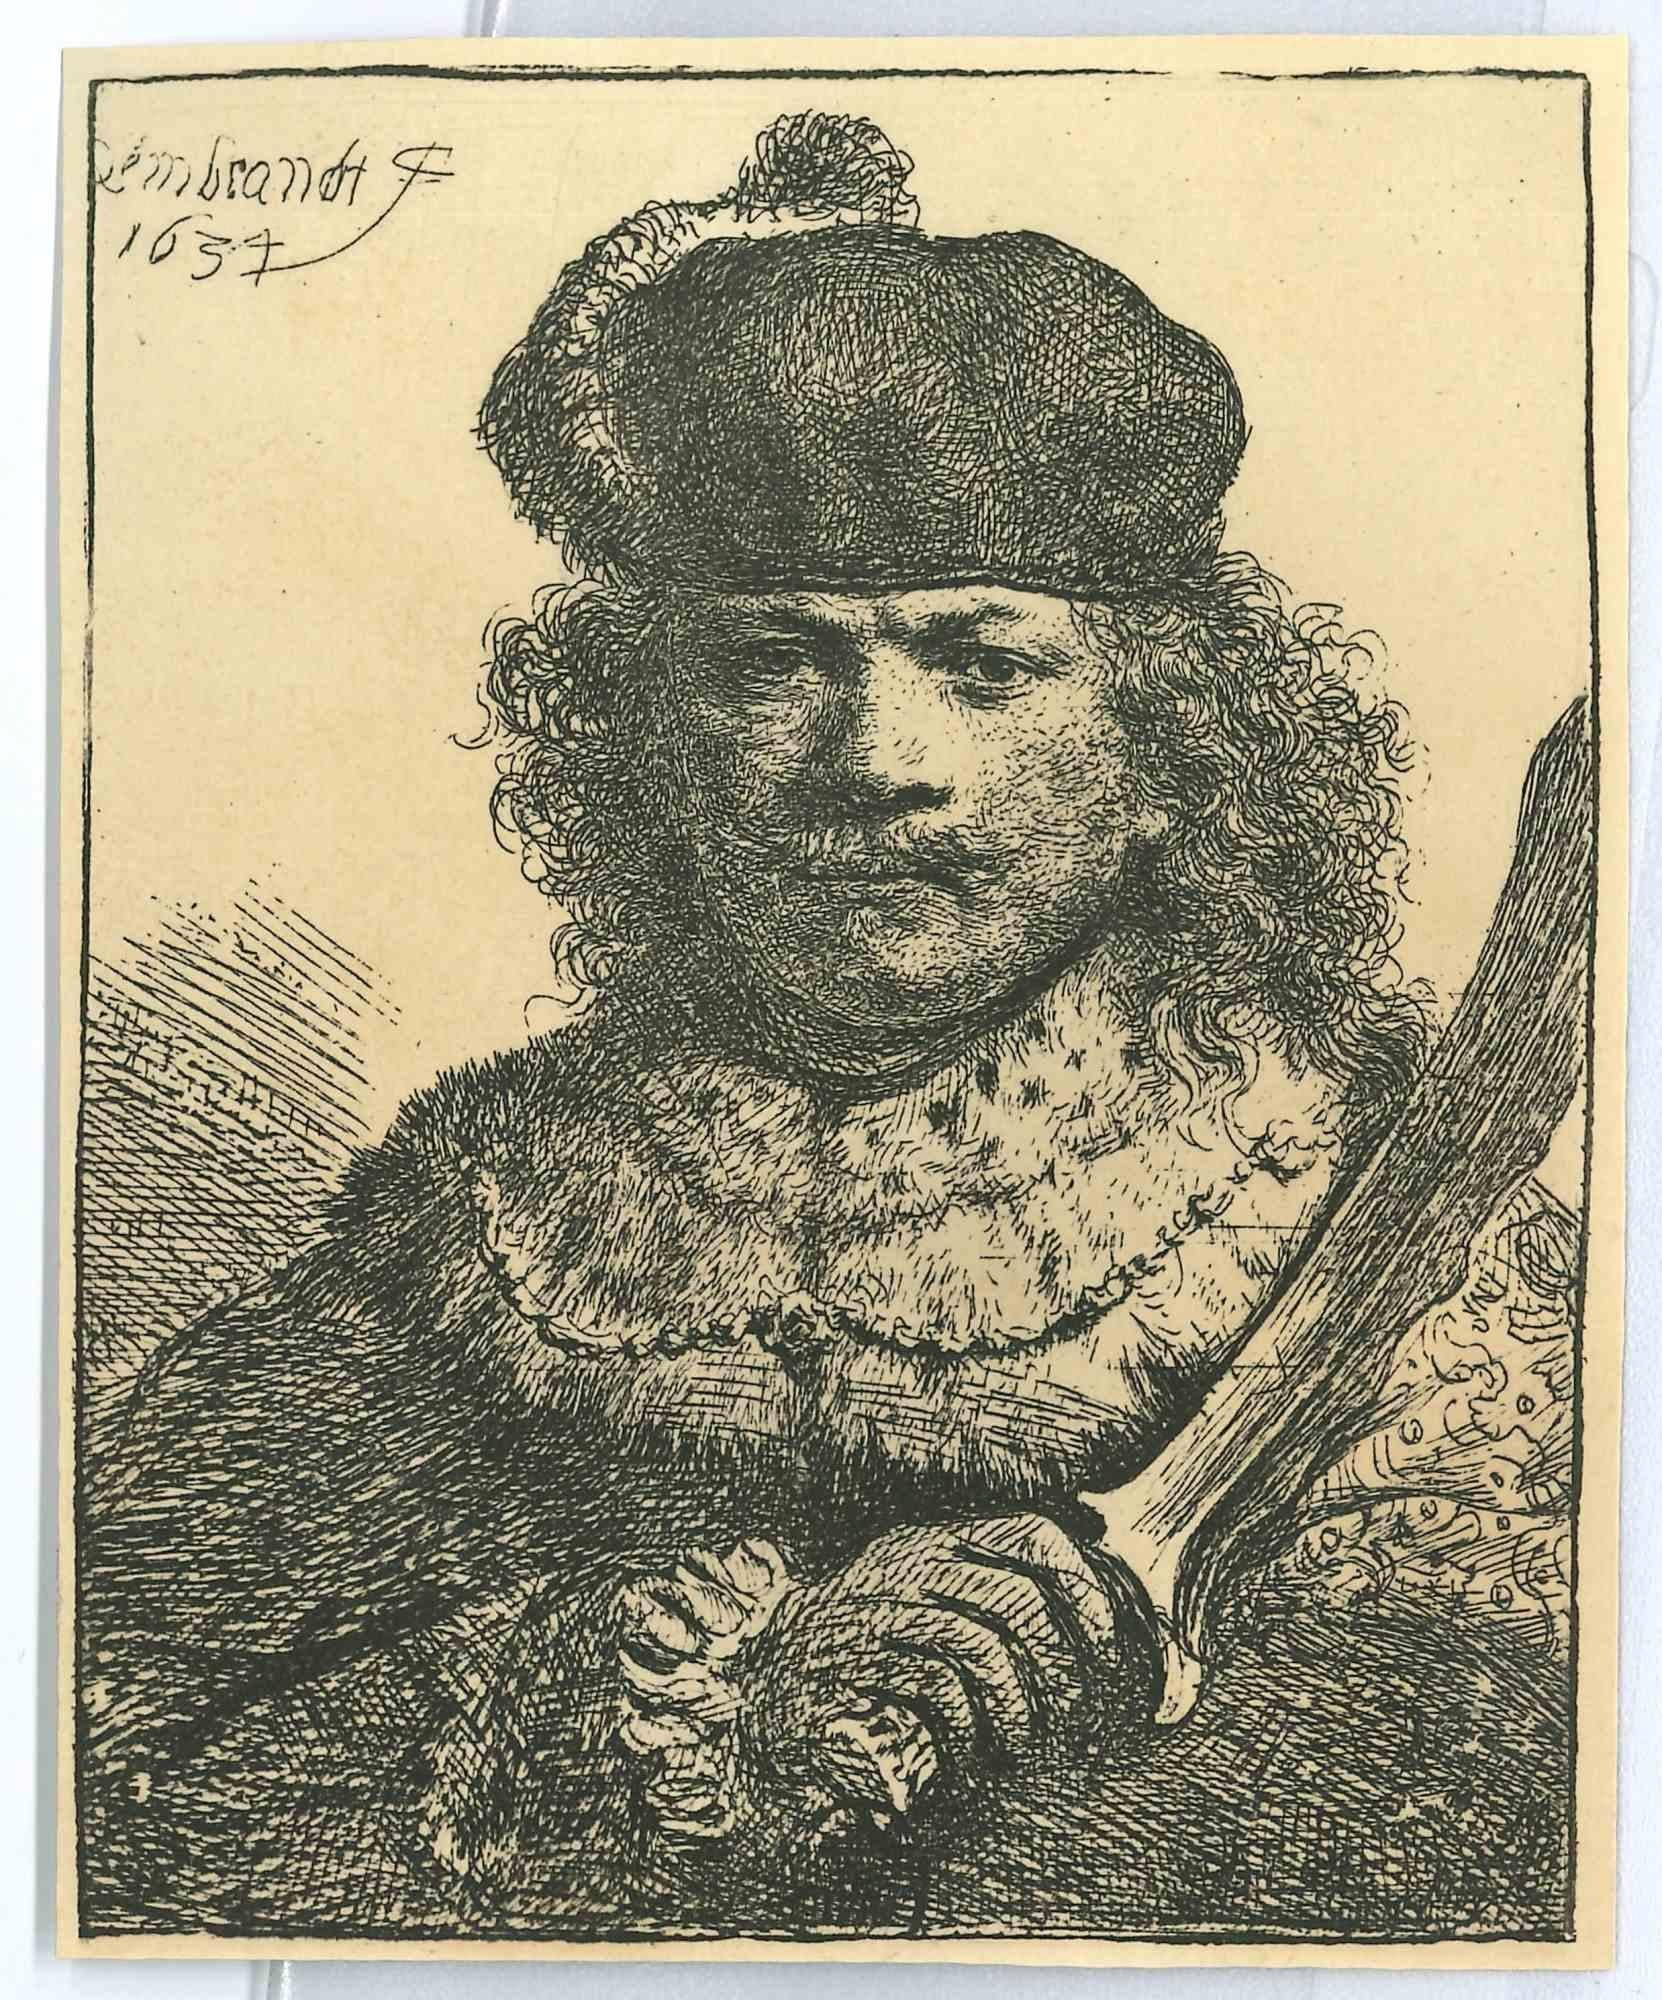 Charles Amand Durand Figurative Print - Self-portrait with Raised Sabre - Engraving after Rembrandt - 19th Century